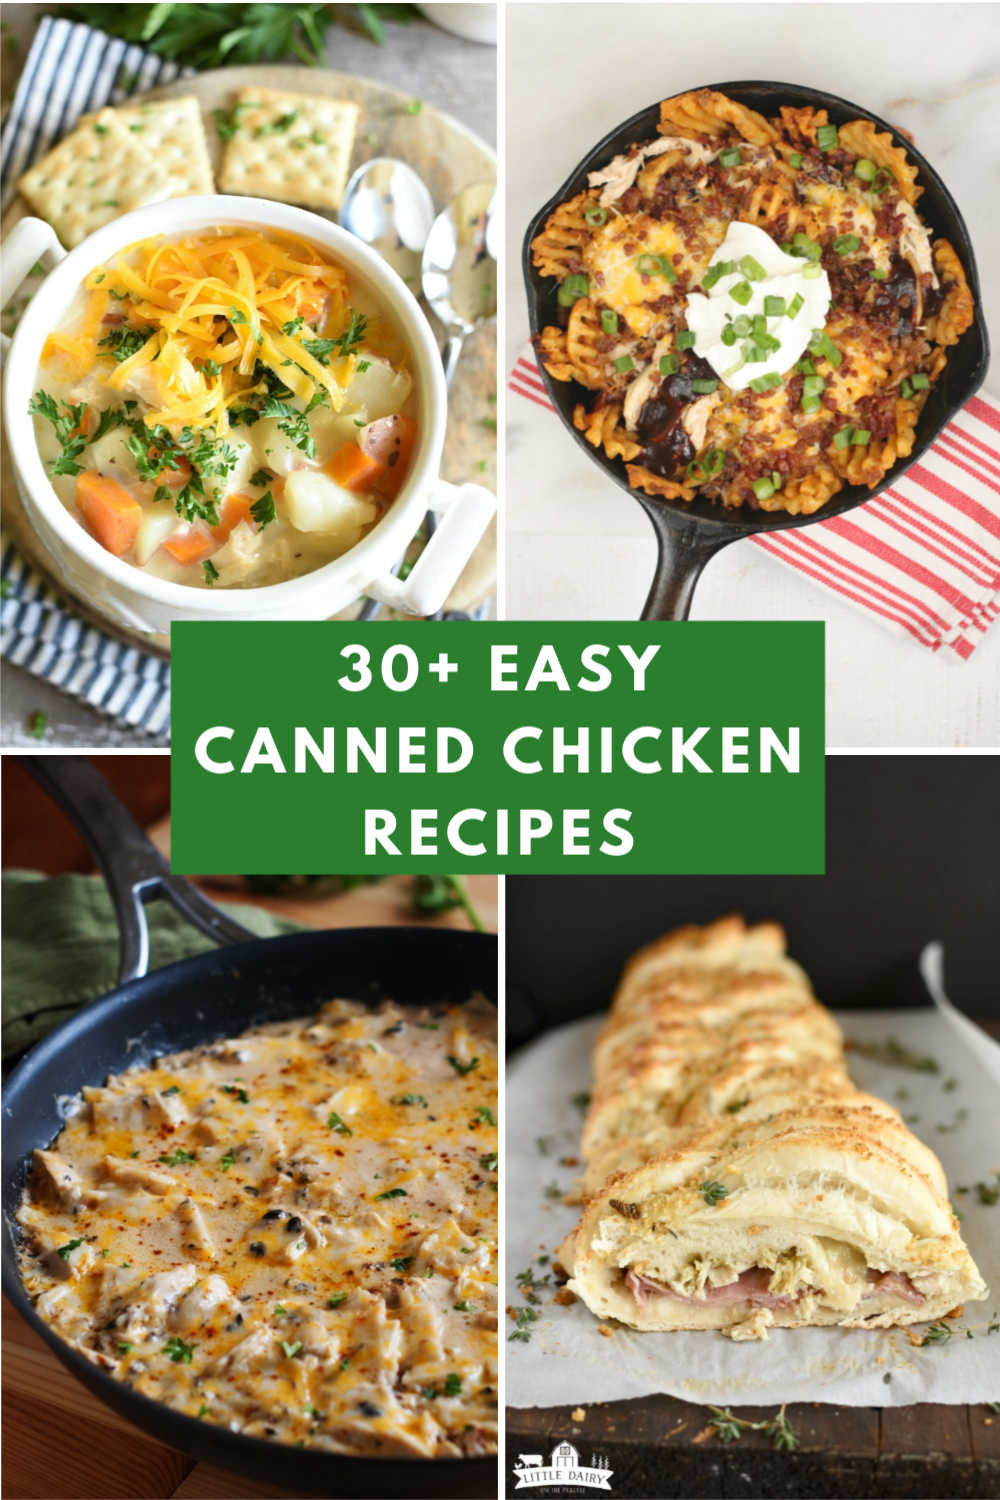 Canned Chicken Recipes 